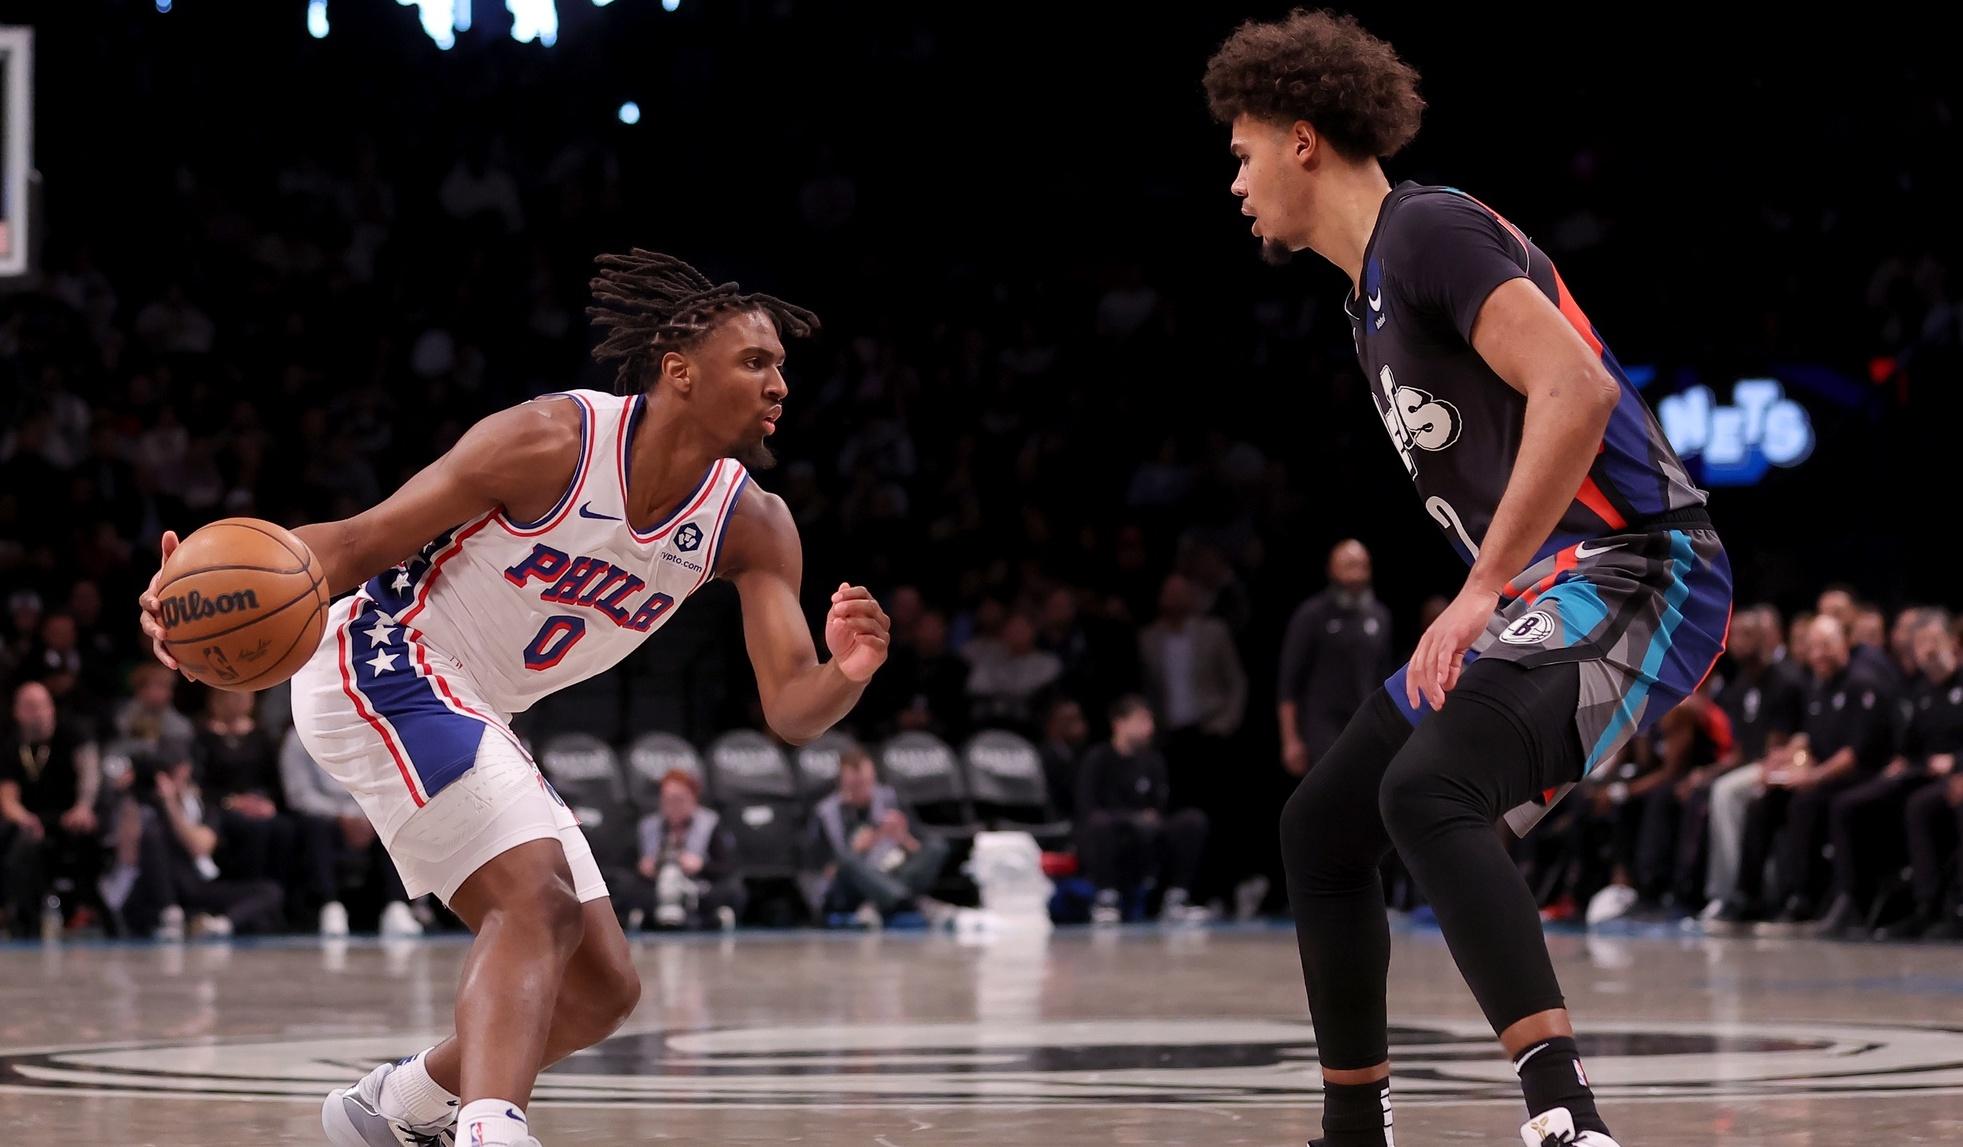 Philadelphia 76ers guard Tyrese Maxey (0) controls the ball against Brooklyn Nets forward Cameron Johnson (2) during the second quarter at Barclays Center. / Brad Penner-USA TODAY Sports